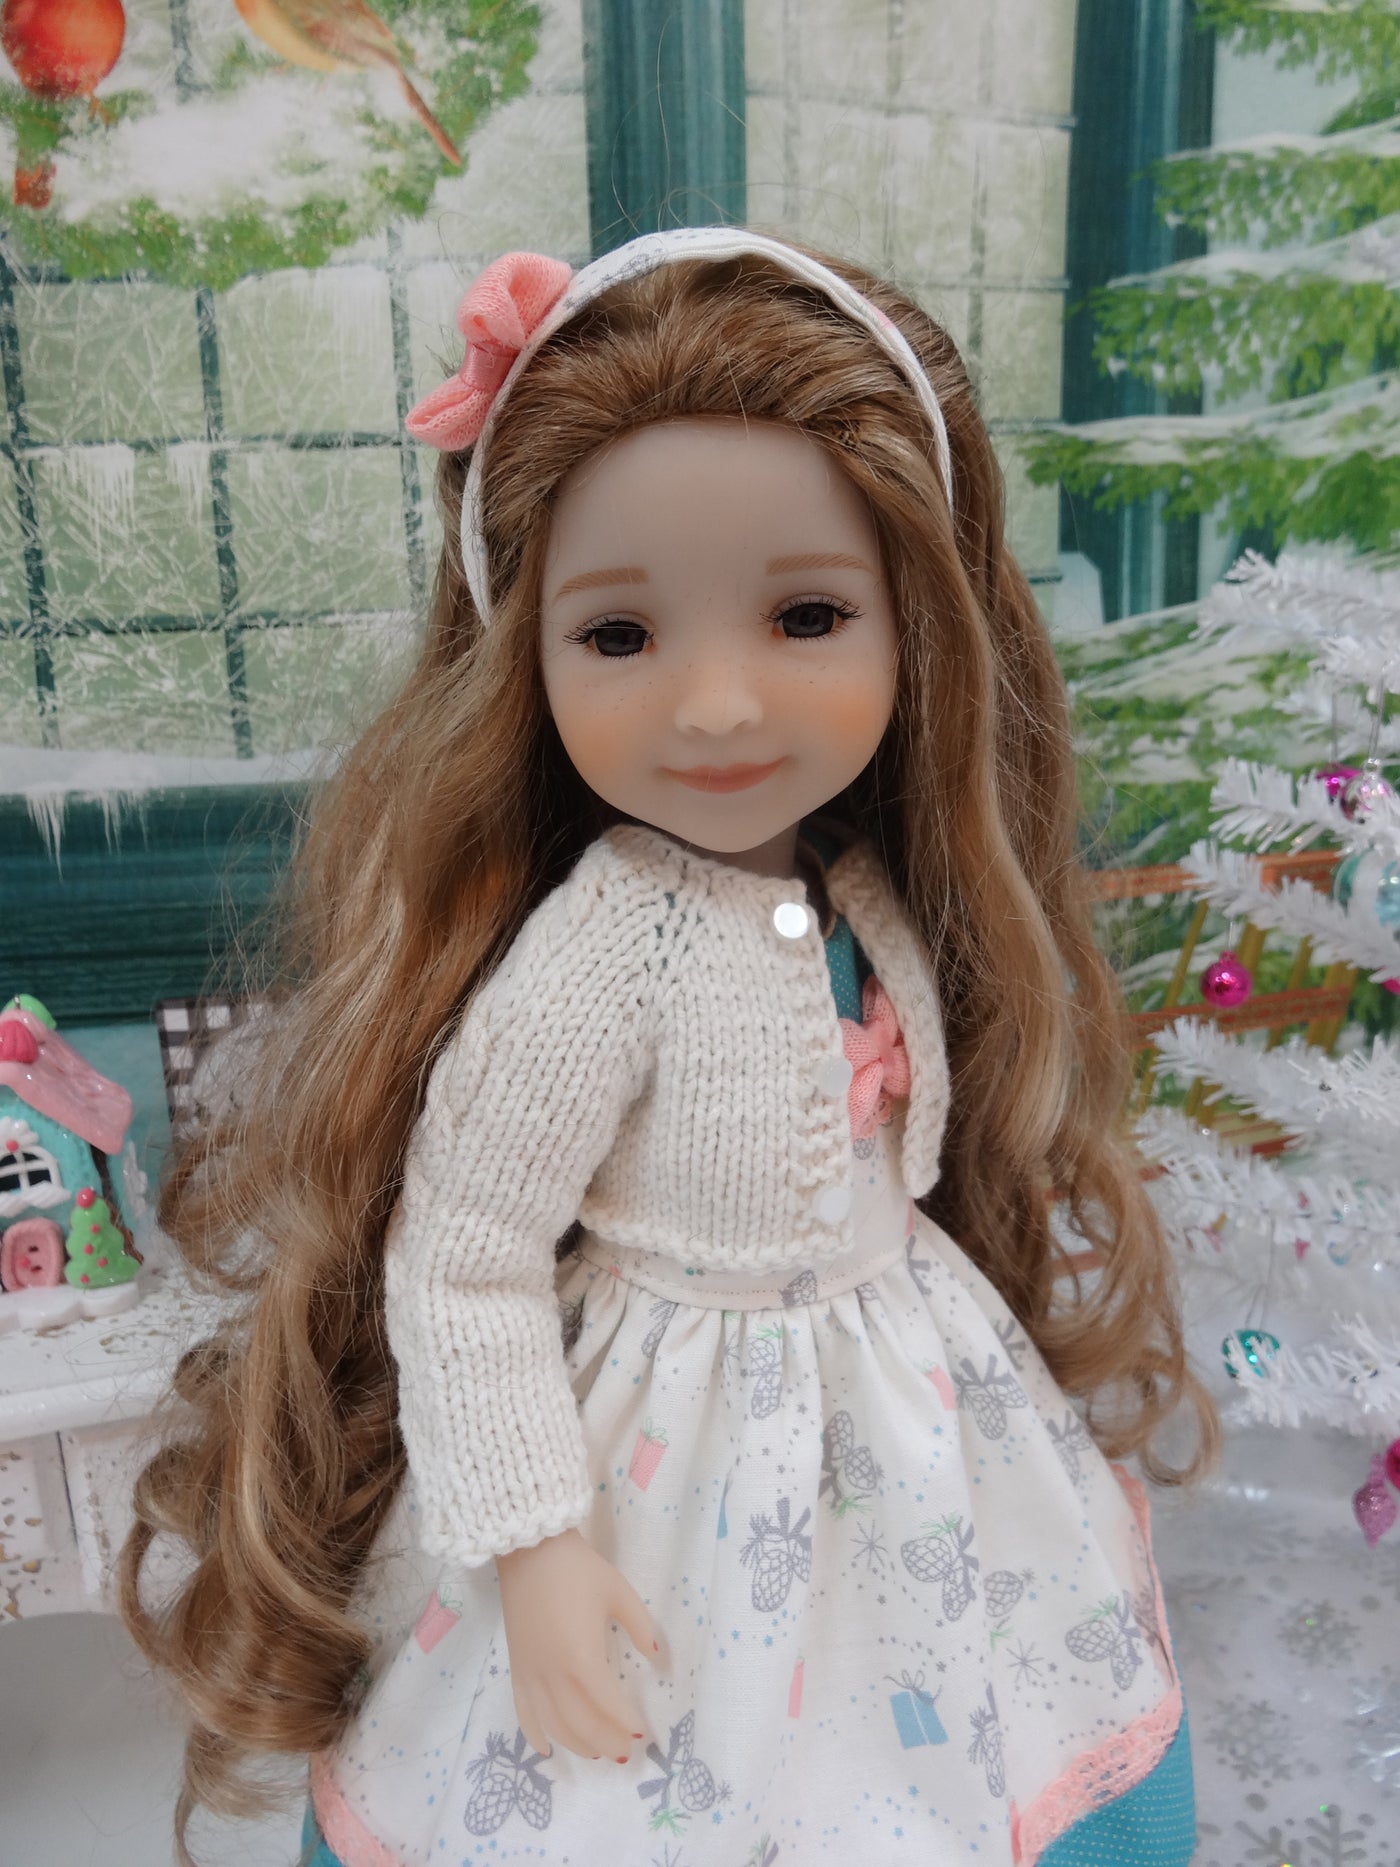 Winter's Gifts - dress & sweater ensemble for Ruby Red Fashion Friends doll